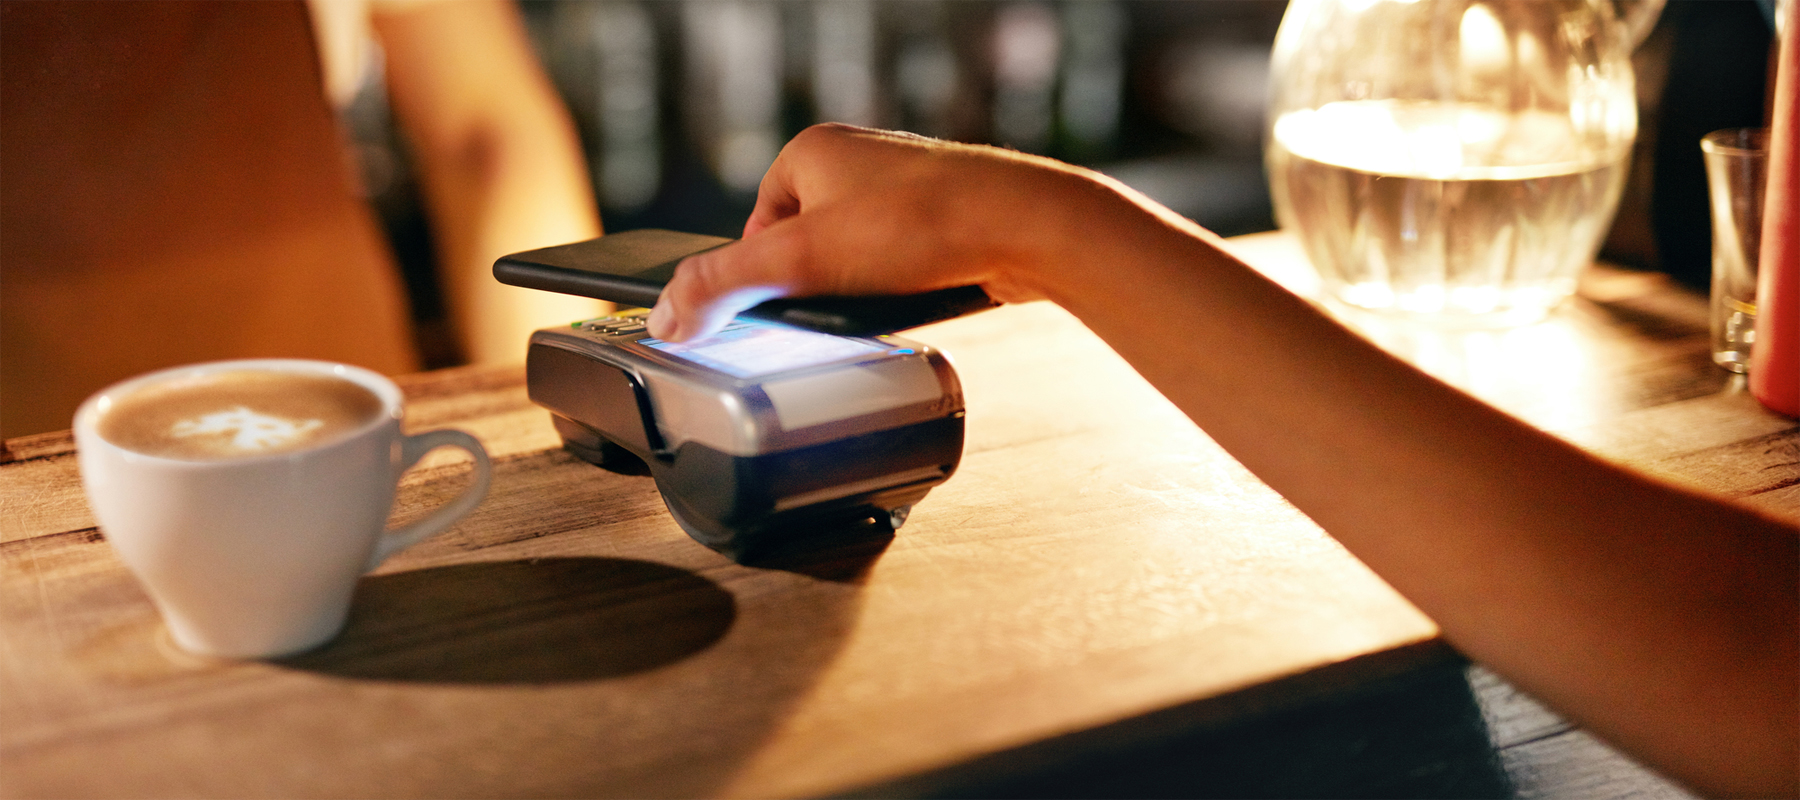 Mobile POS Payment at a Coffee Shop